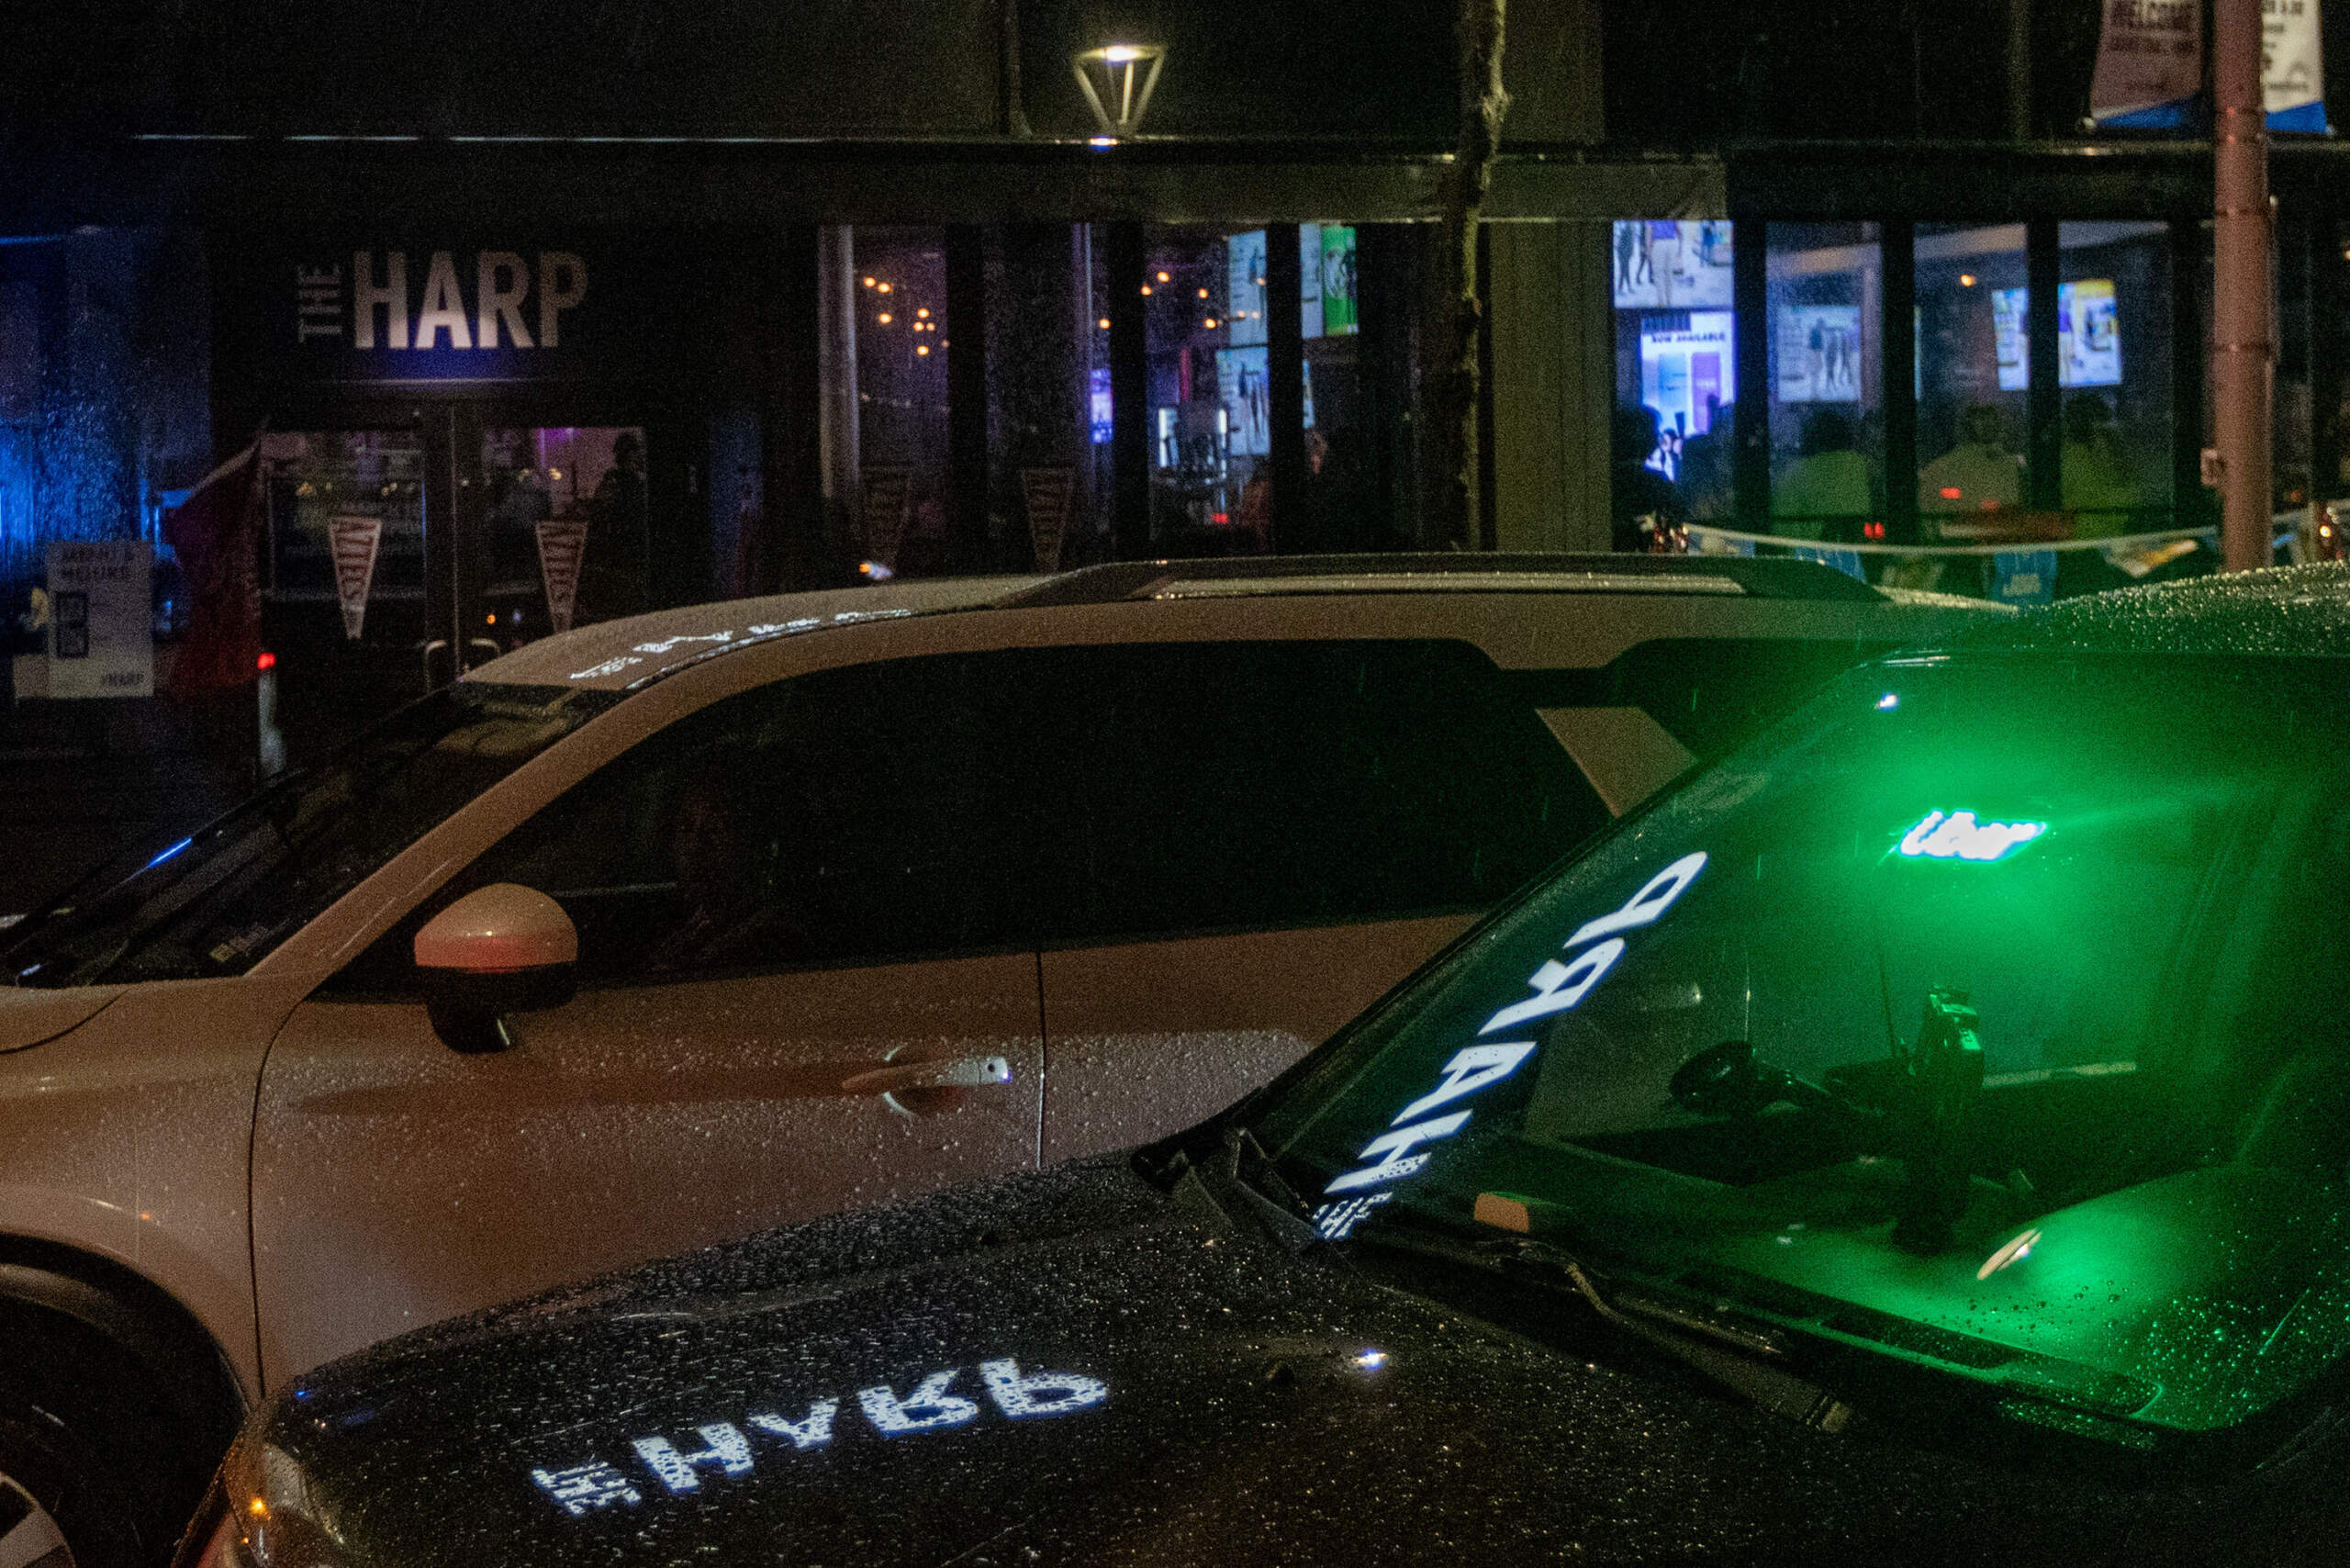 Prosecutors have accused Alvin Campbell of posing as an Uber driver to pick up women outside popular Boston bars. In this image, an Uber passes the Harp on Causeway Street. (Jesse Costa/WBUR)